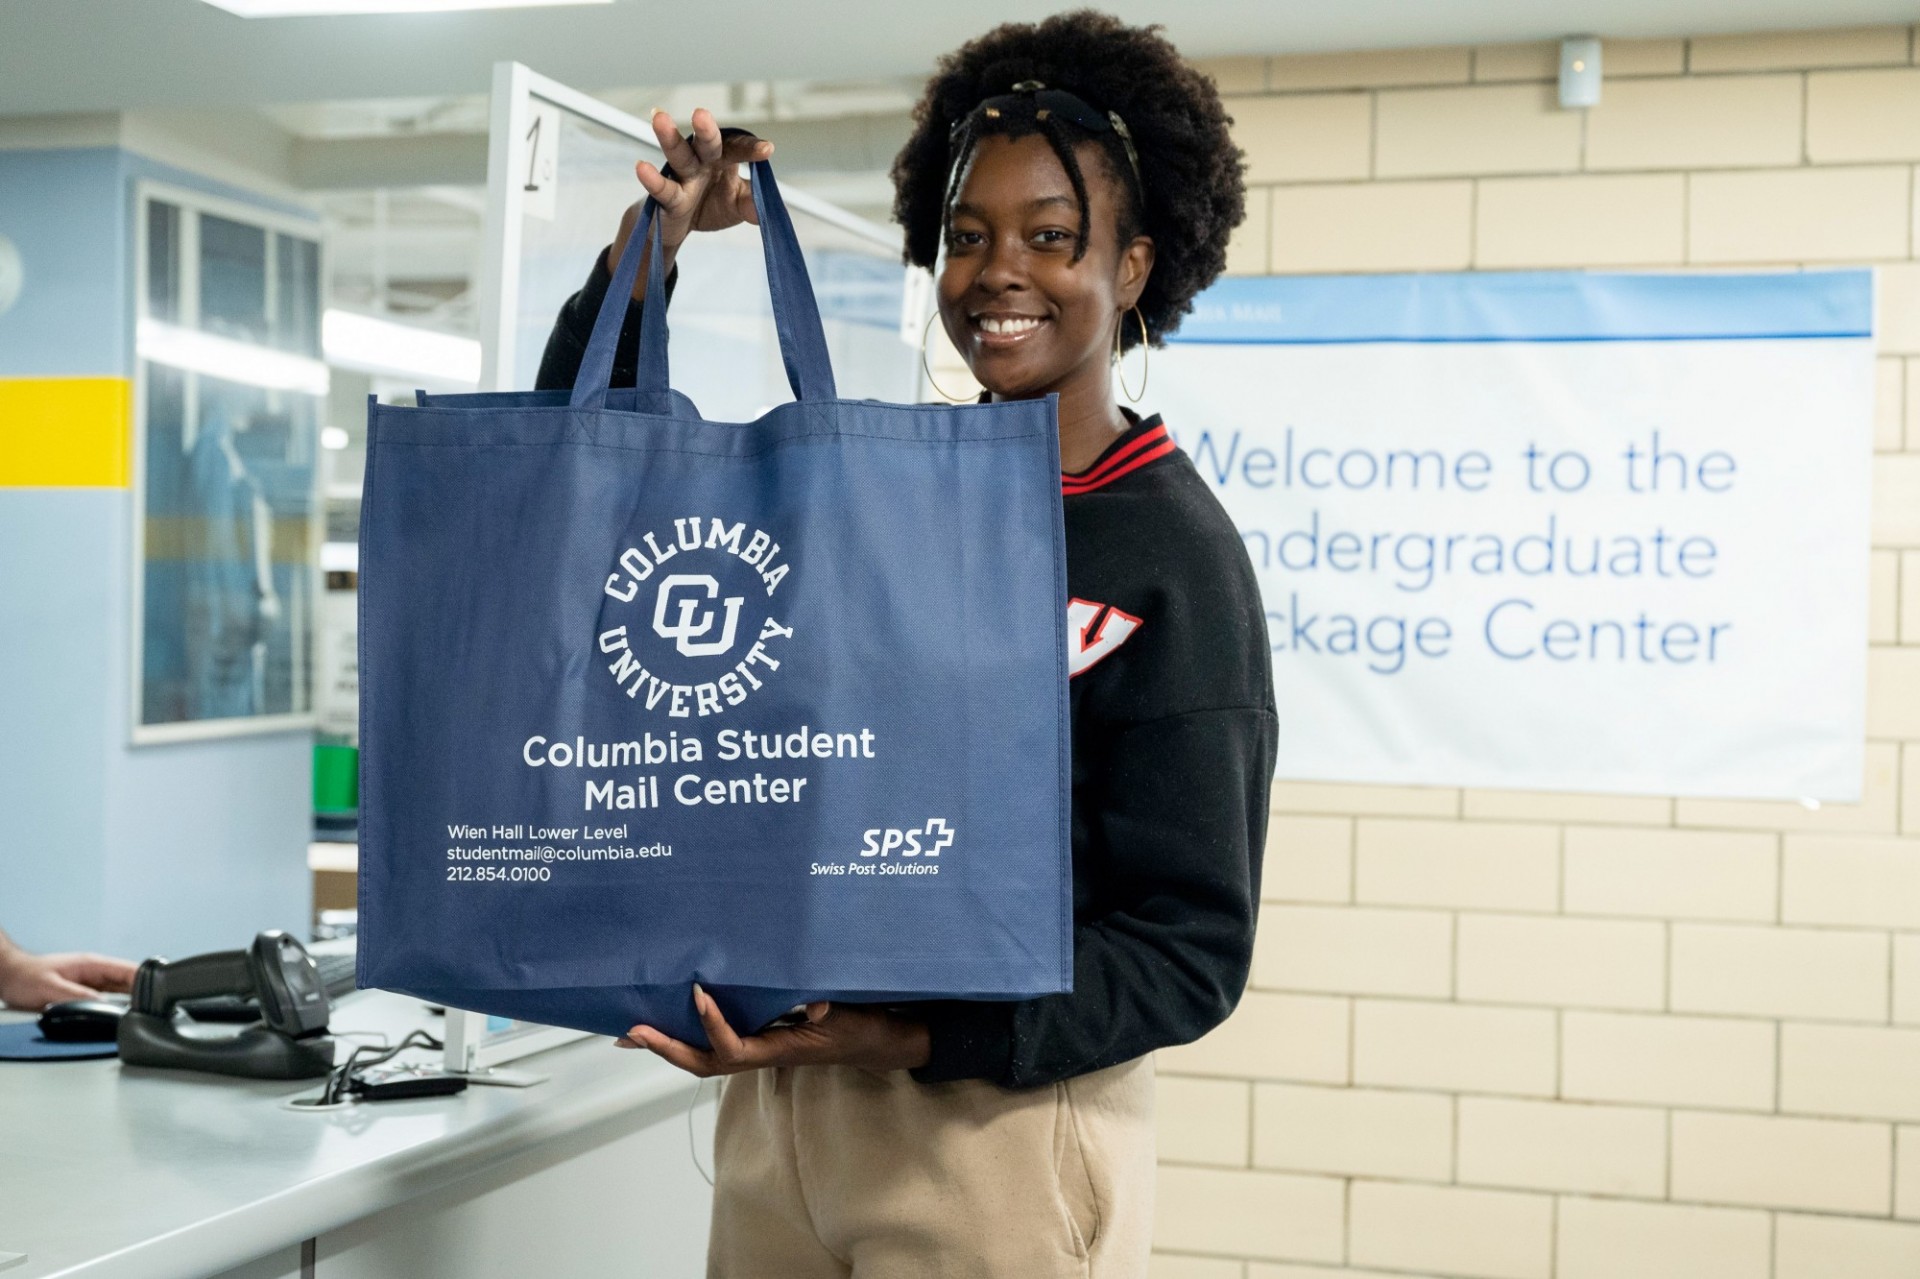 A person holds up a Columbia Student Mail Center bag at the Undergraduate Package Center.